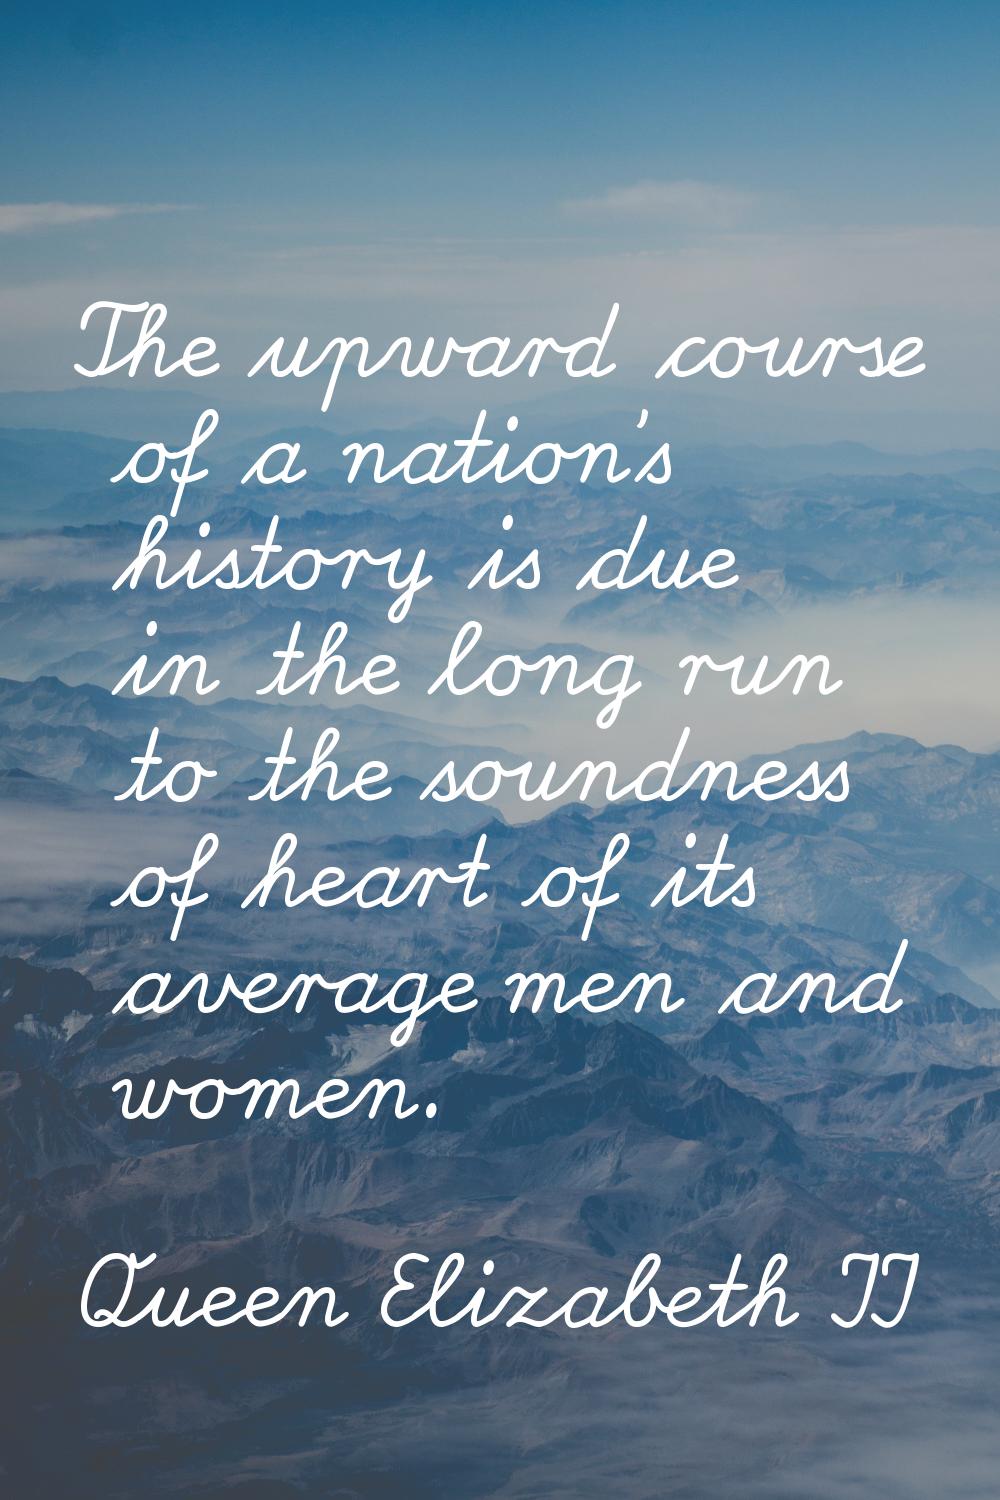 The upward course of a nation's history is due in the long run to the soundness of heart of its ave